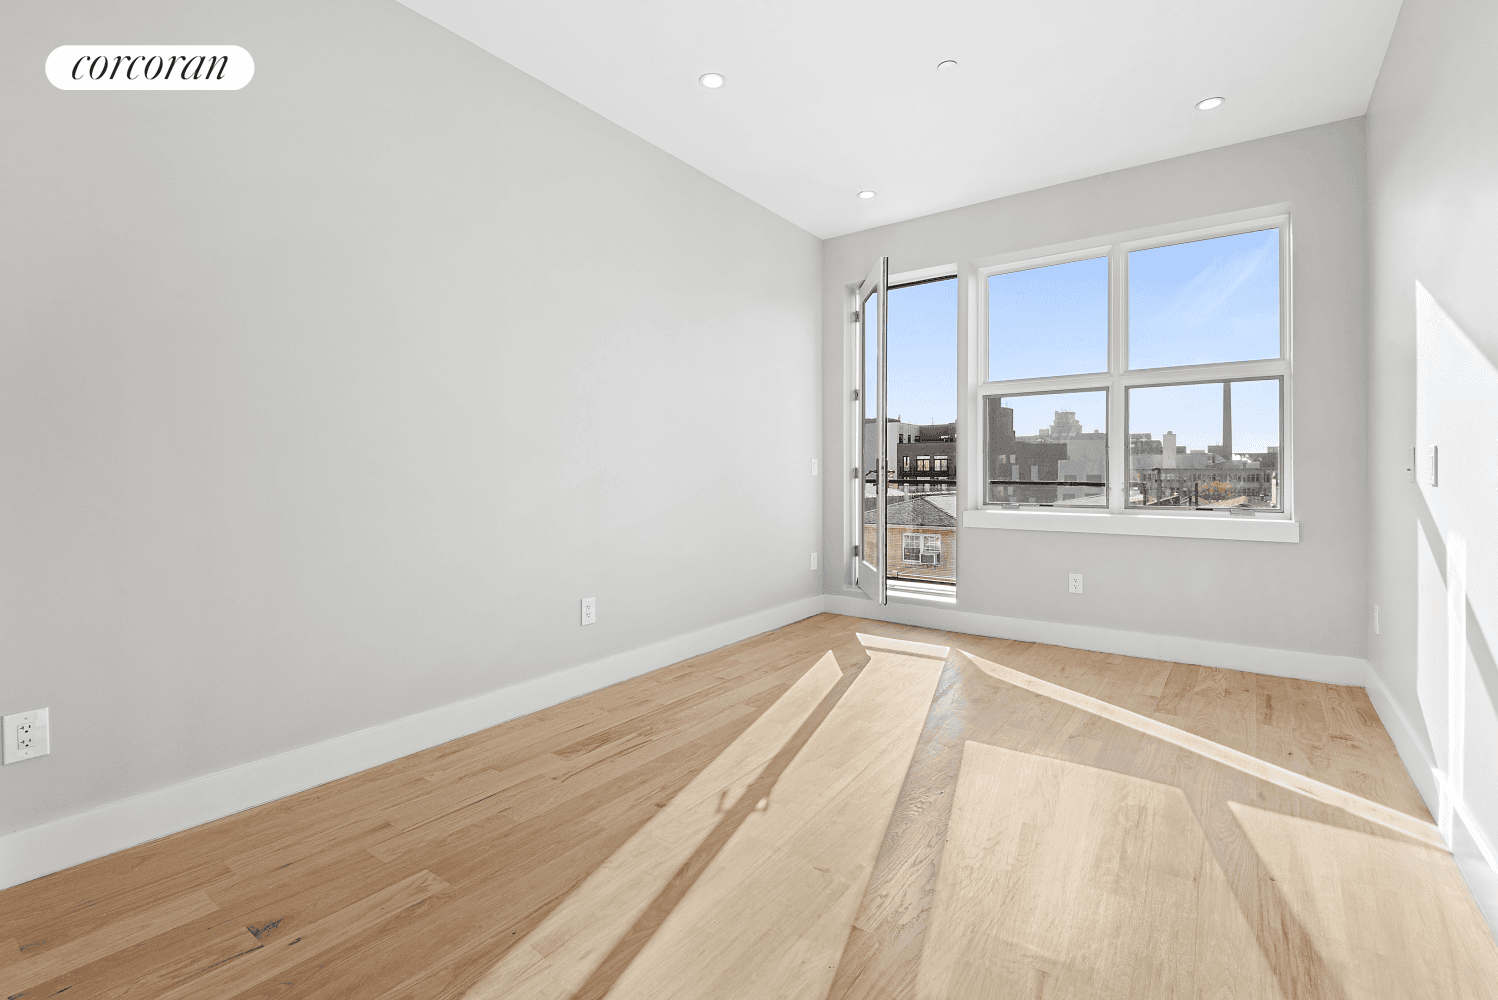 Welcome to 519 Maple Street, an exquisite 1 bedroom, 1 bathroom tenant occupied condonestled in a newly constructed boutique building with 10 units, perfectly situated in the vibrant Crown Heights ...